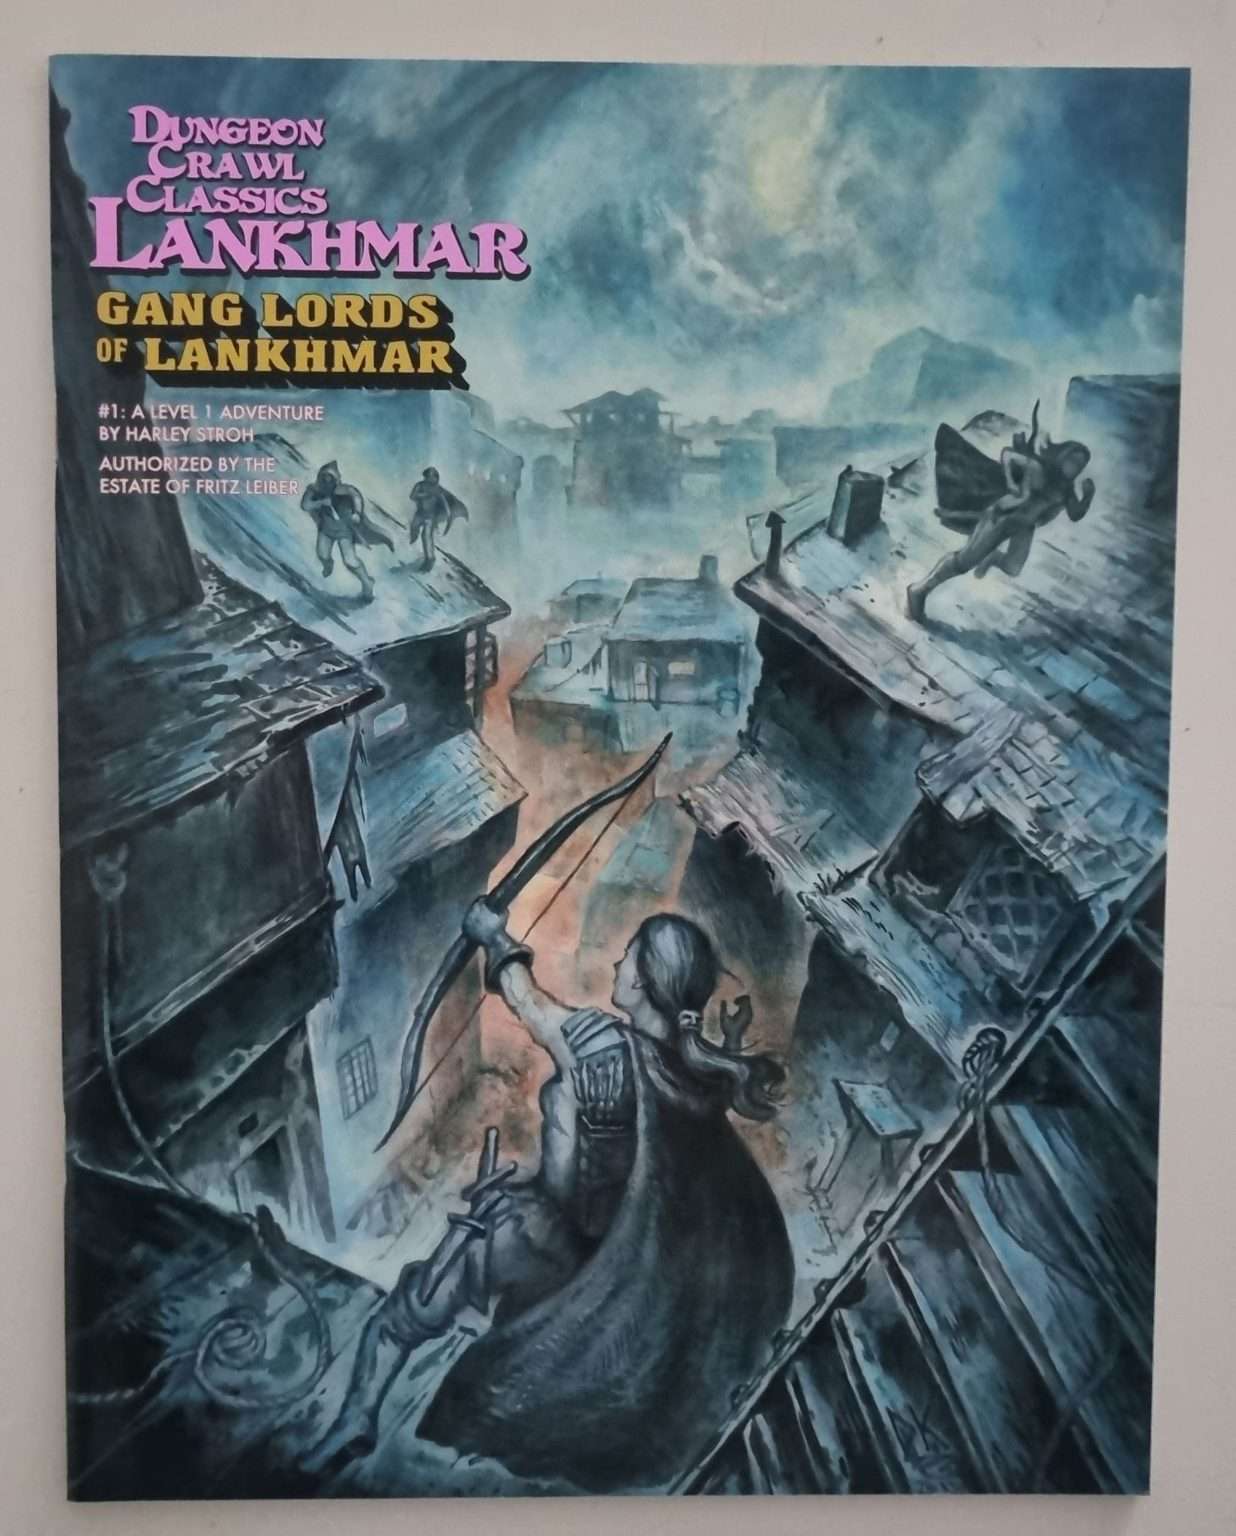 Dungeon Crawl Classics Lankhmar: Gang Lords of Lankhmar #1 Default Title